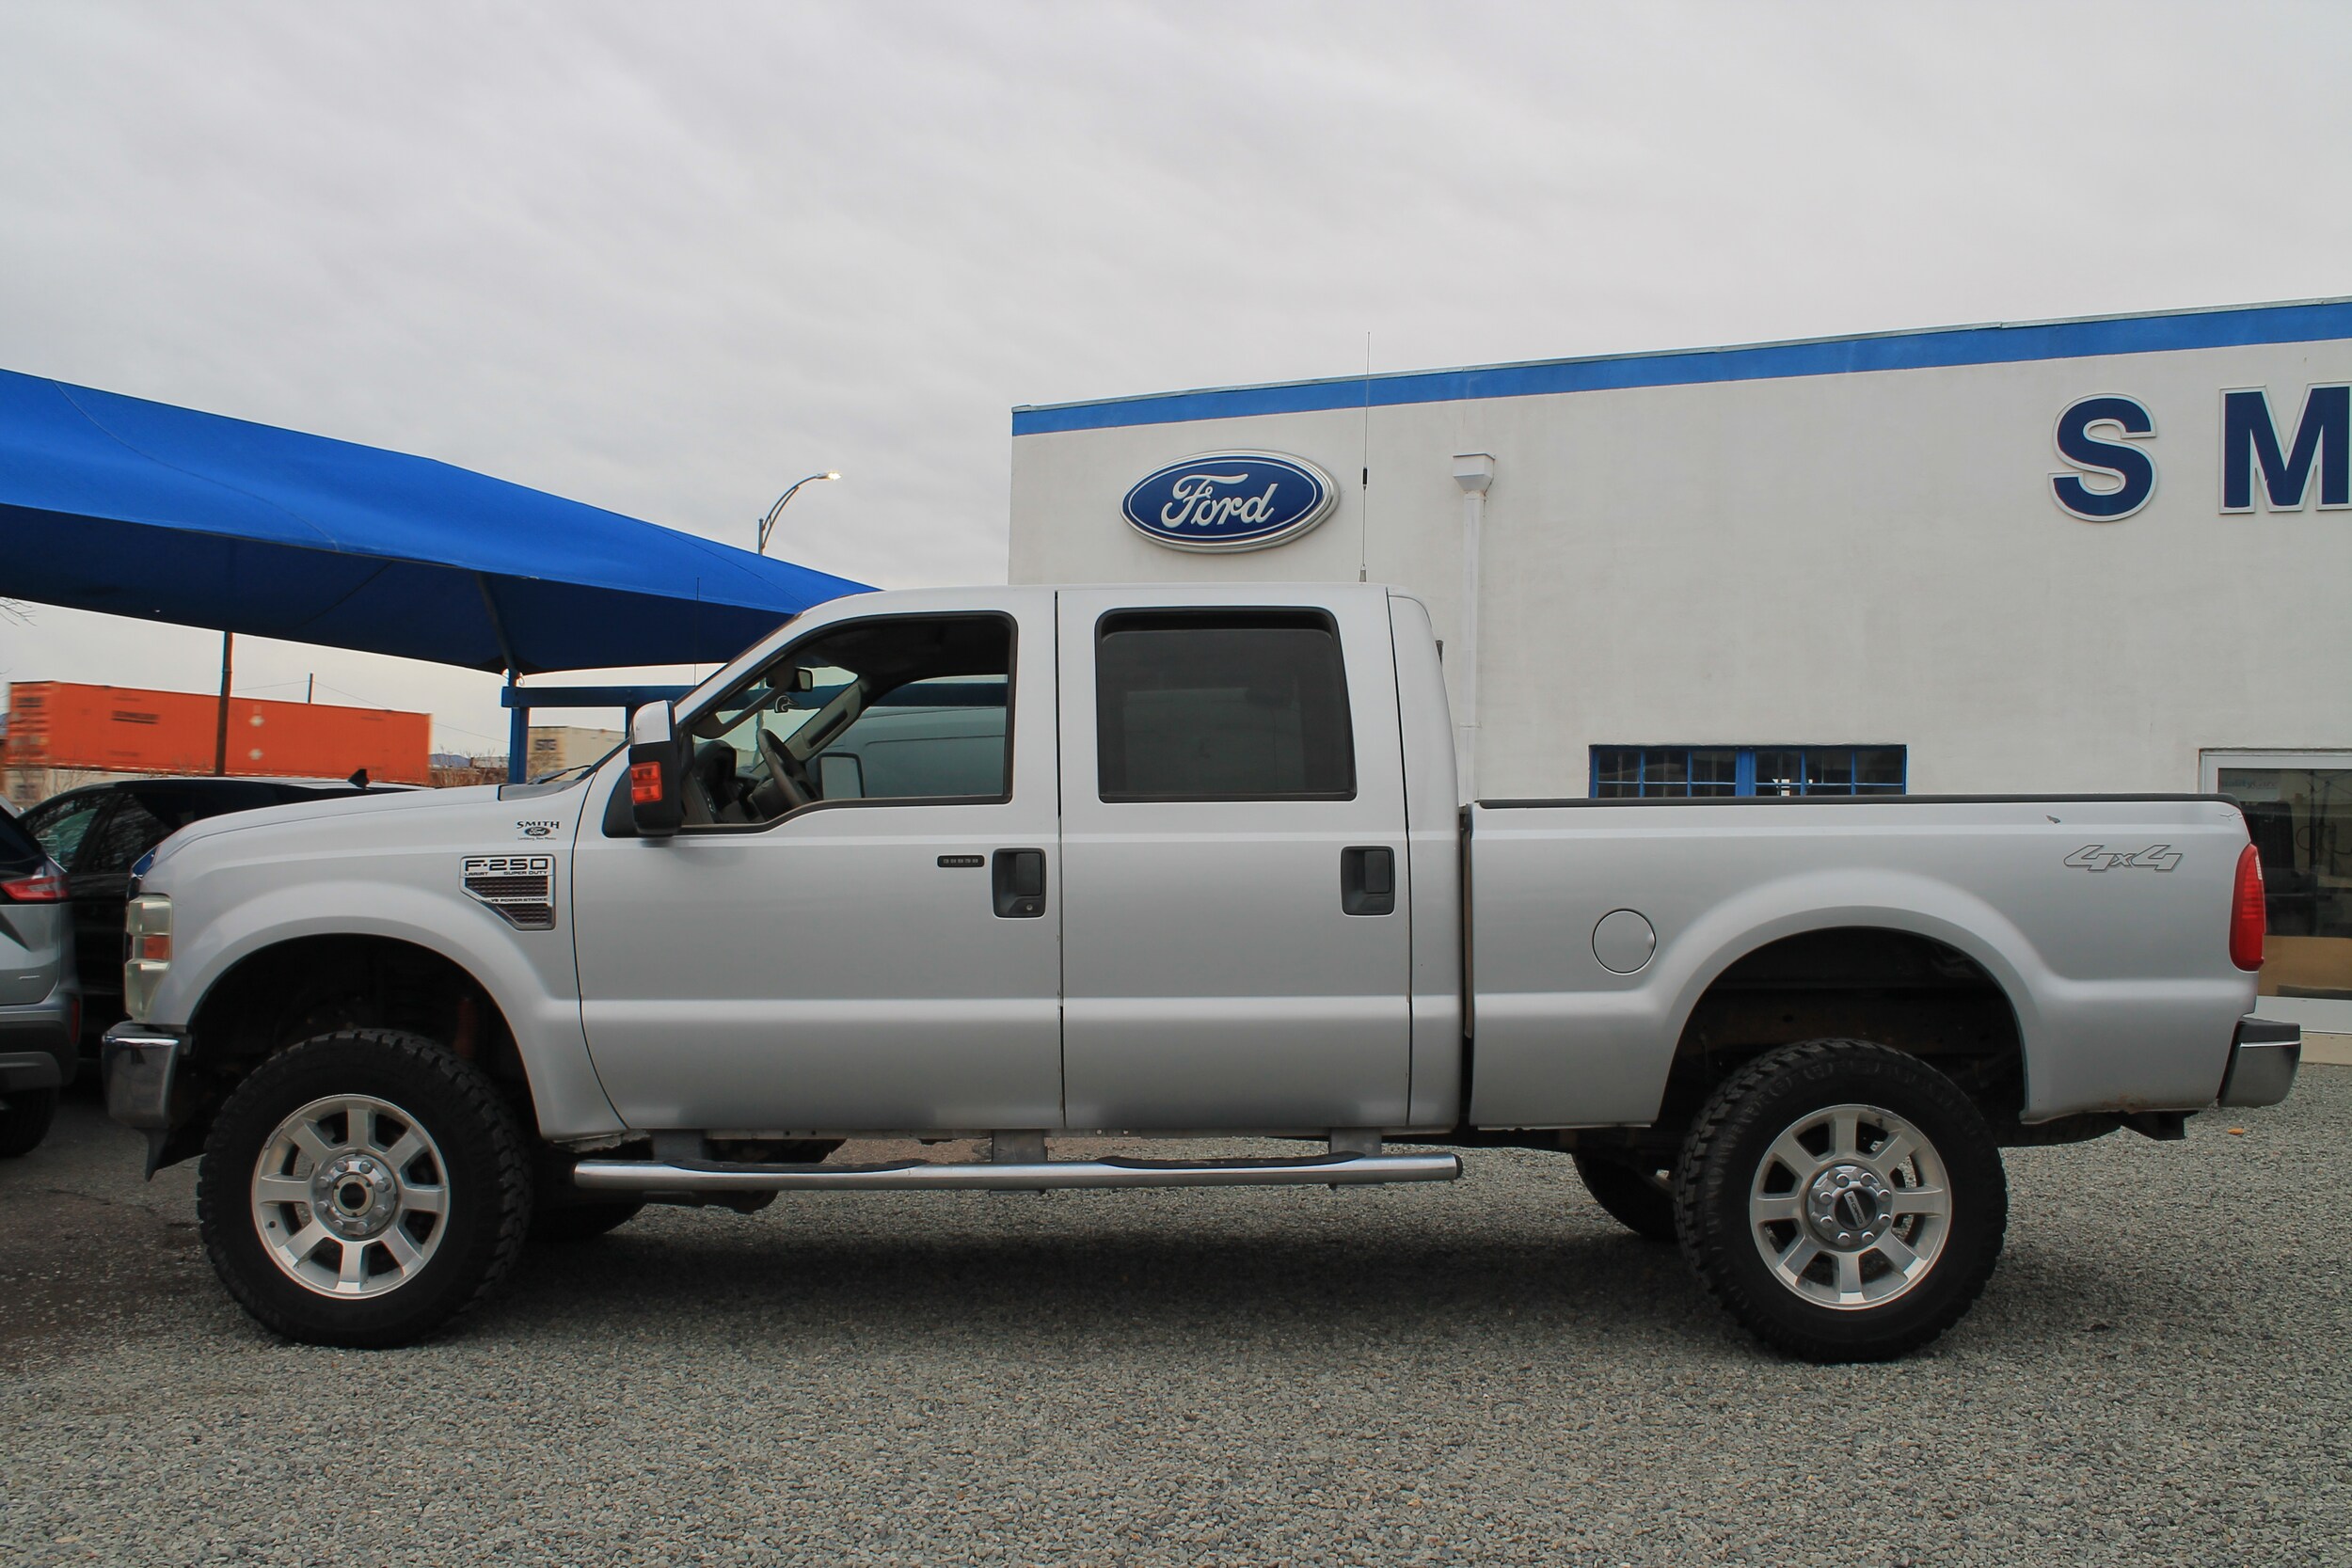 Used 2008 Ford F-250 Super Duty Lariat with VIN 1FTSW21R48EE24490 for sale in Lordsburg, NM